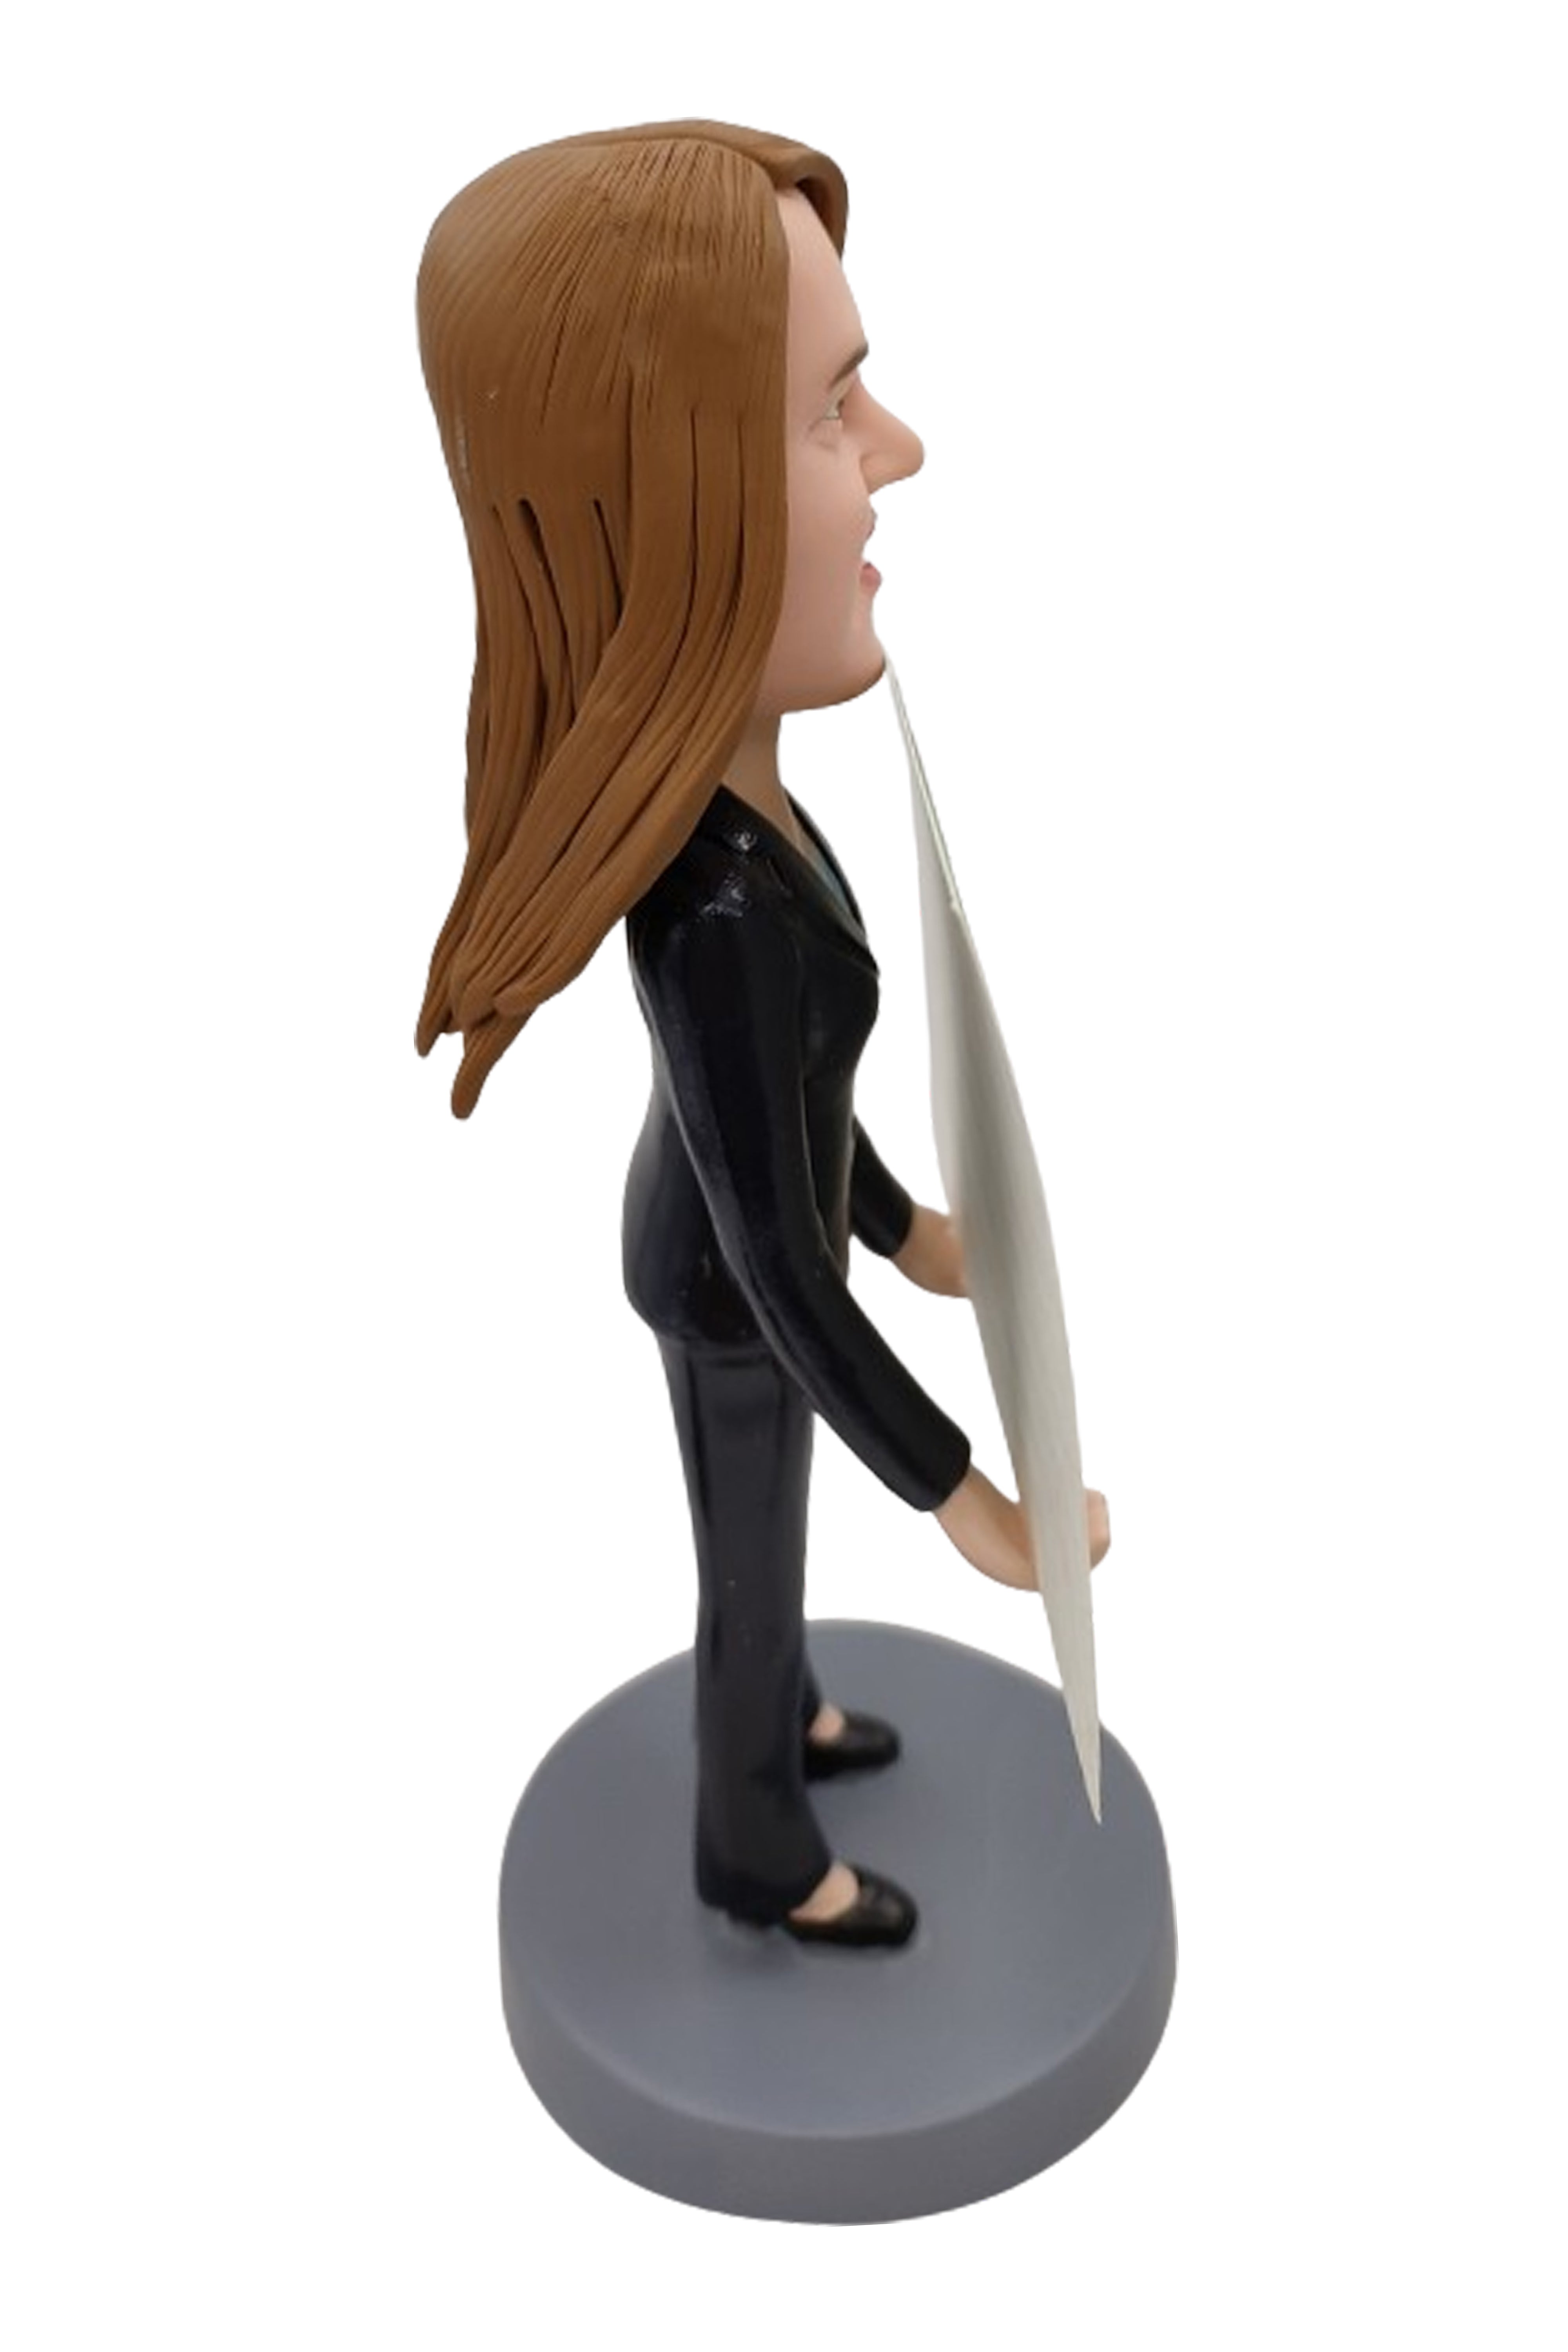 Custom Female Executive Business Card Holder In Pant Suit Bobblehead